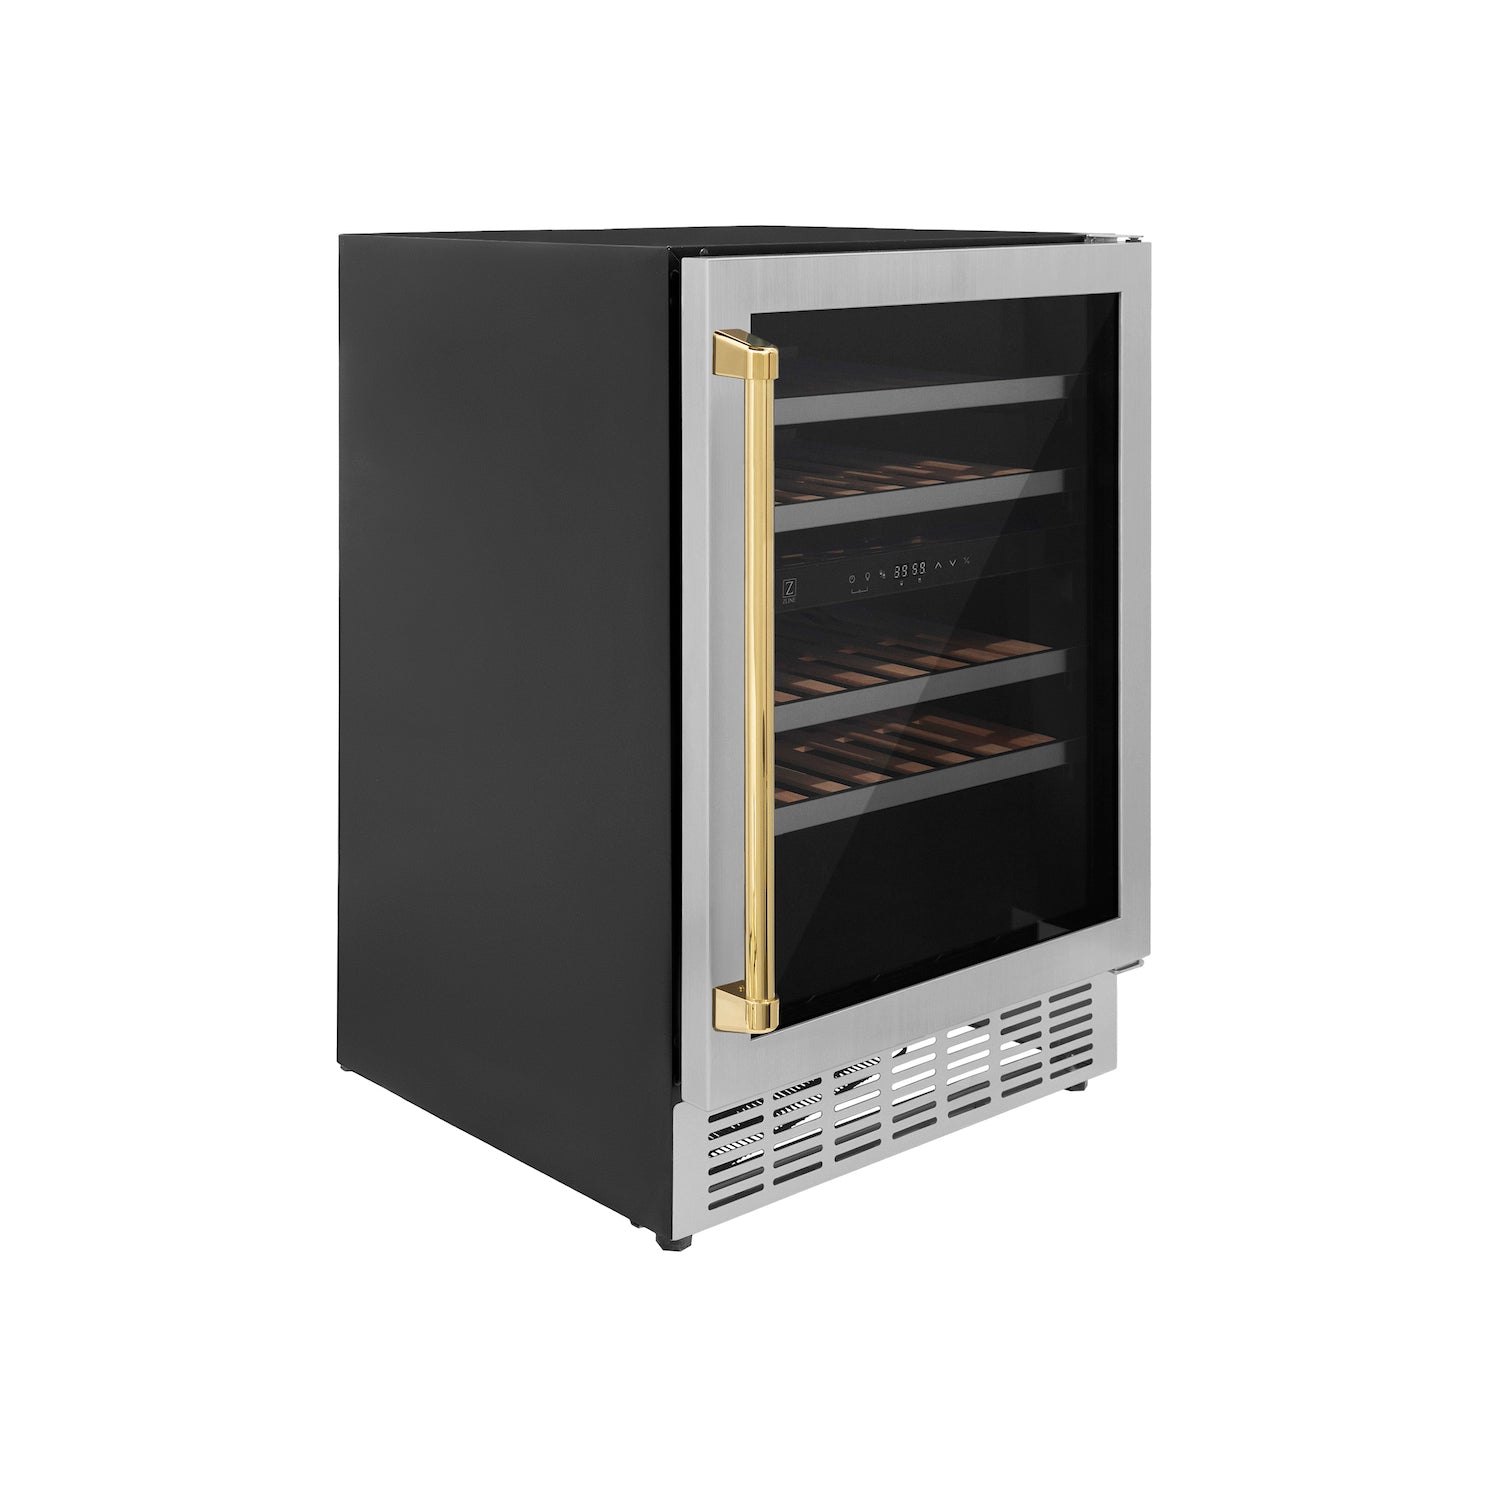 24" Wine Cooler with Polished Gold handle side.